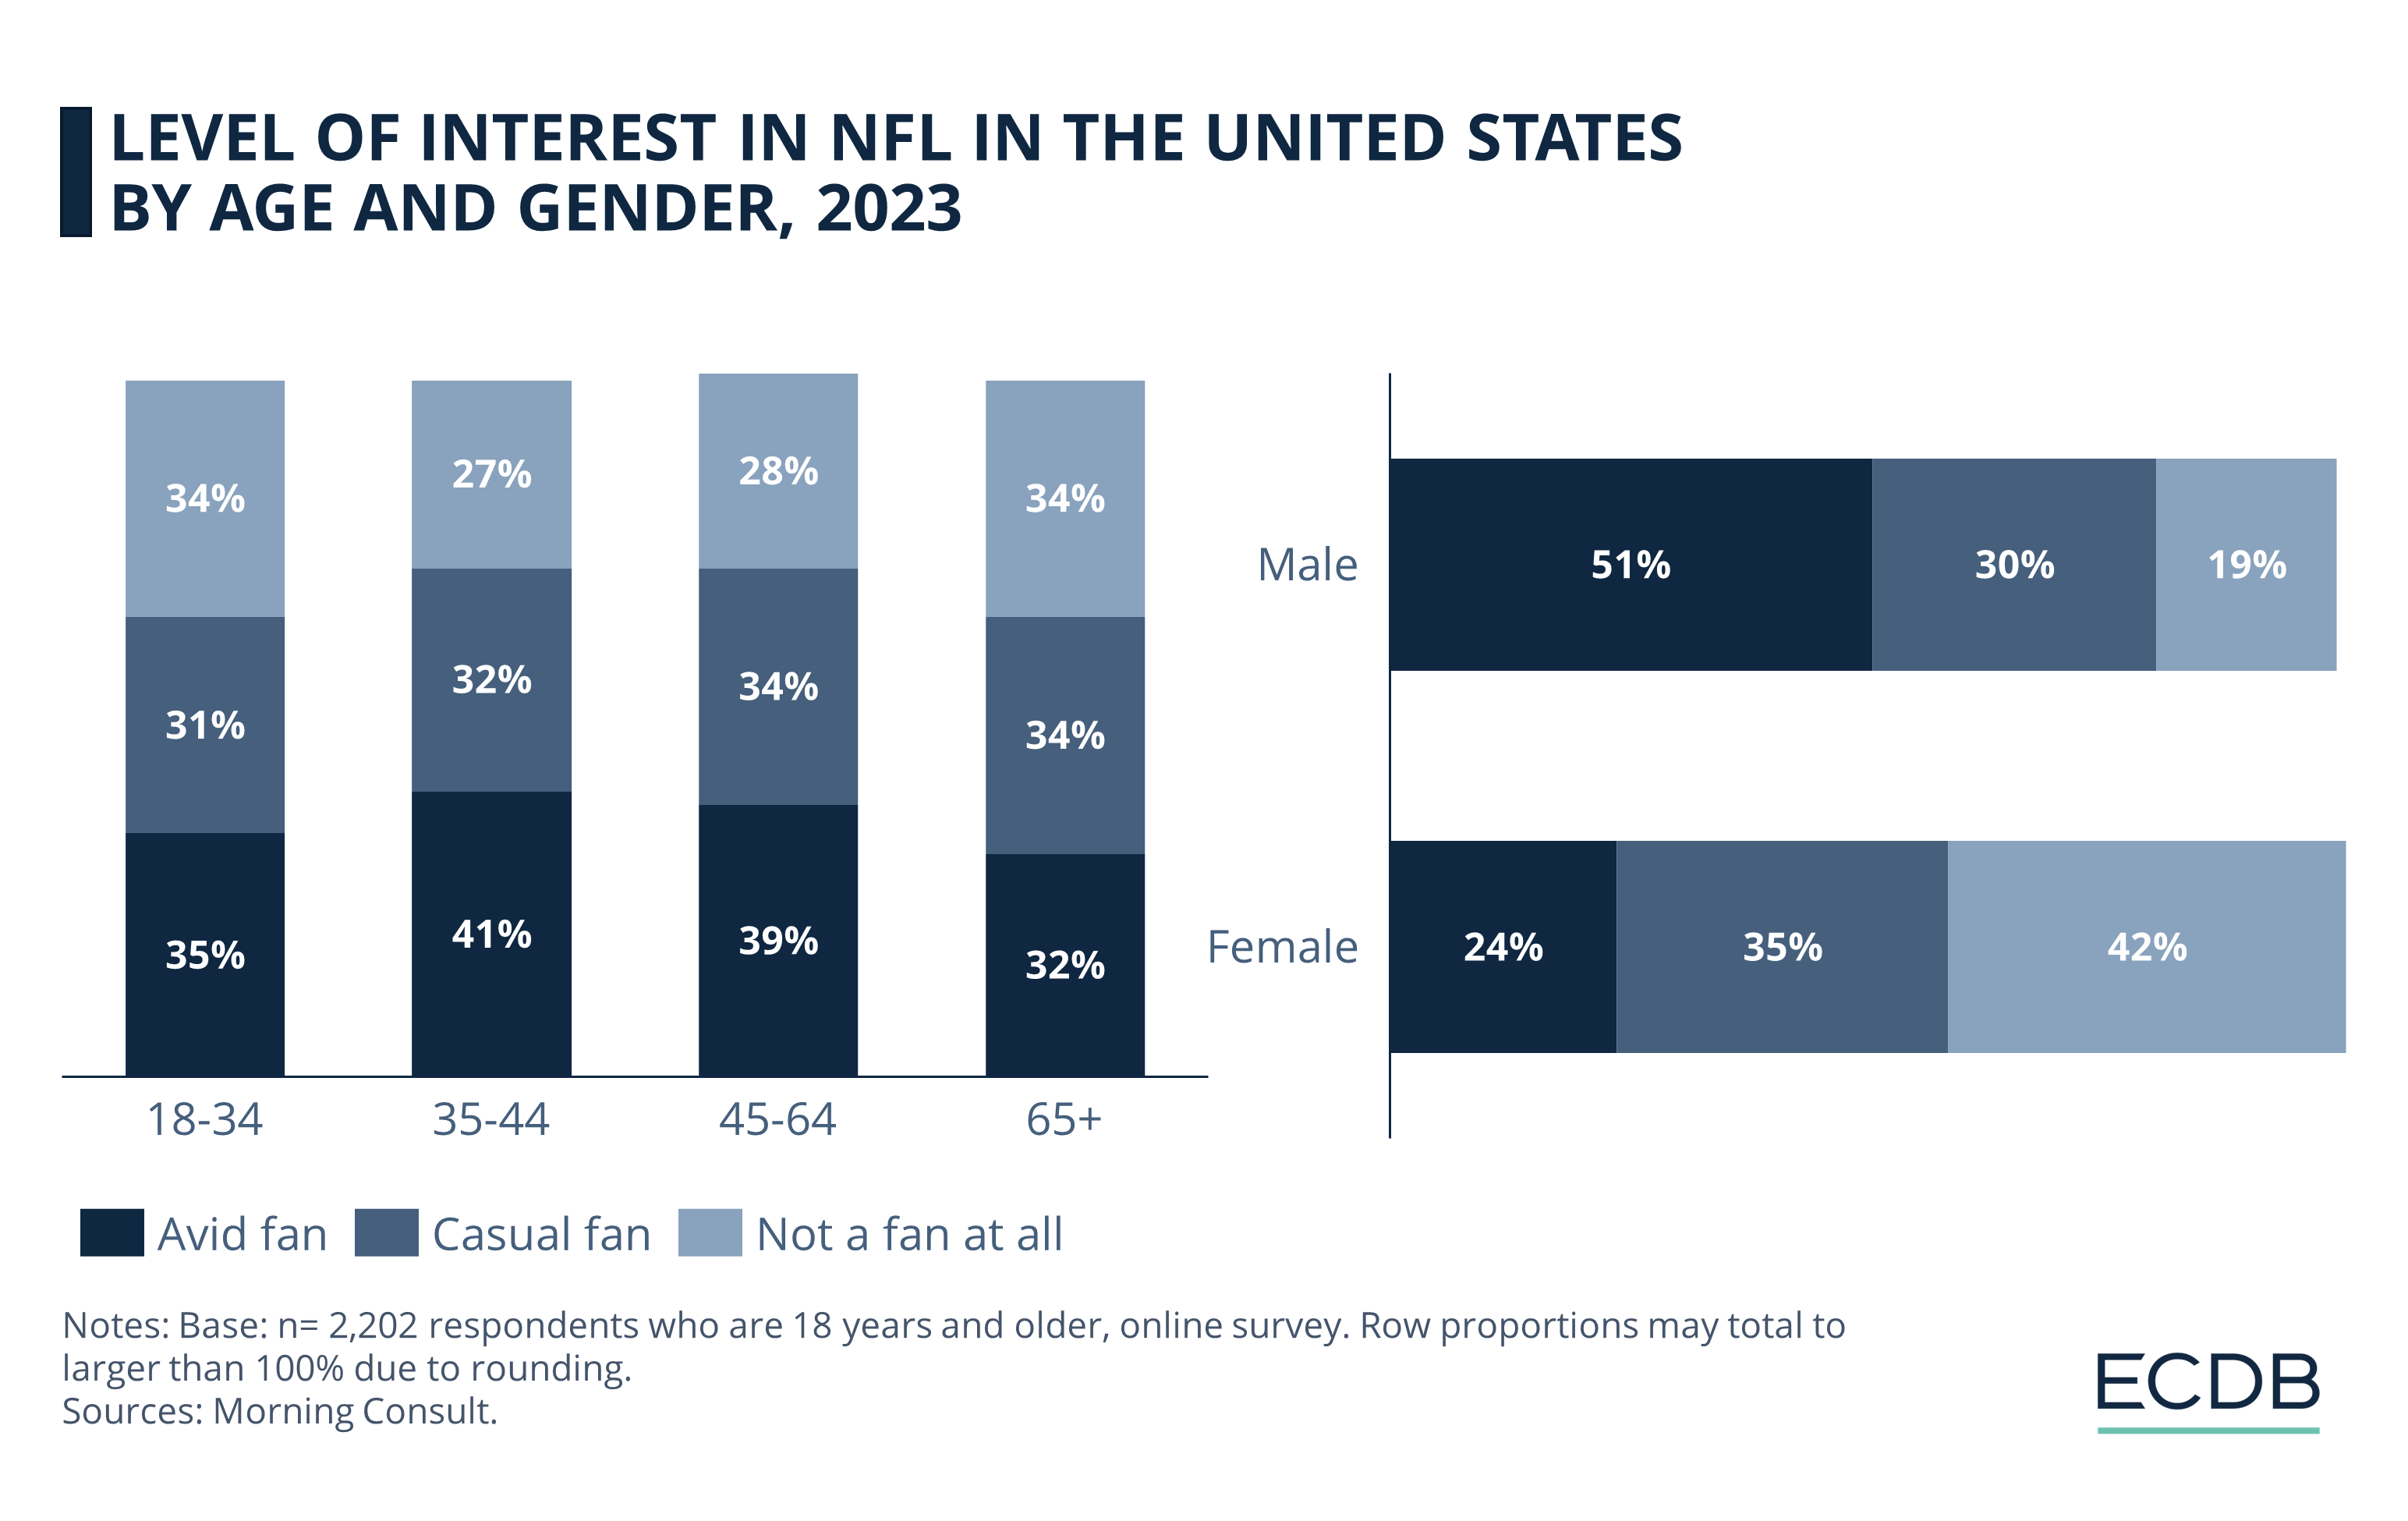 Level of Interest in NFL in the United States by Age and Gender, 2023